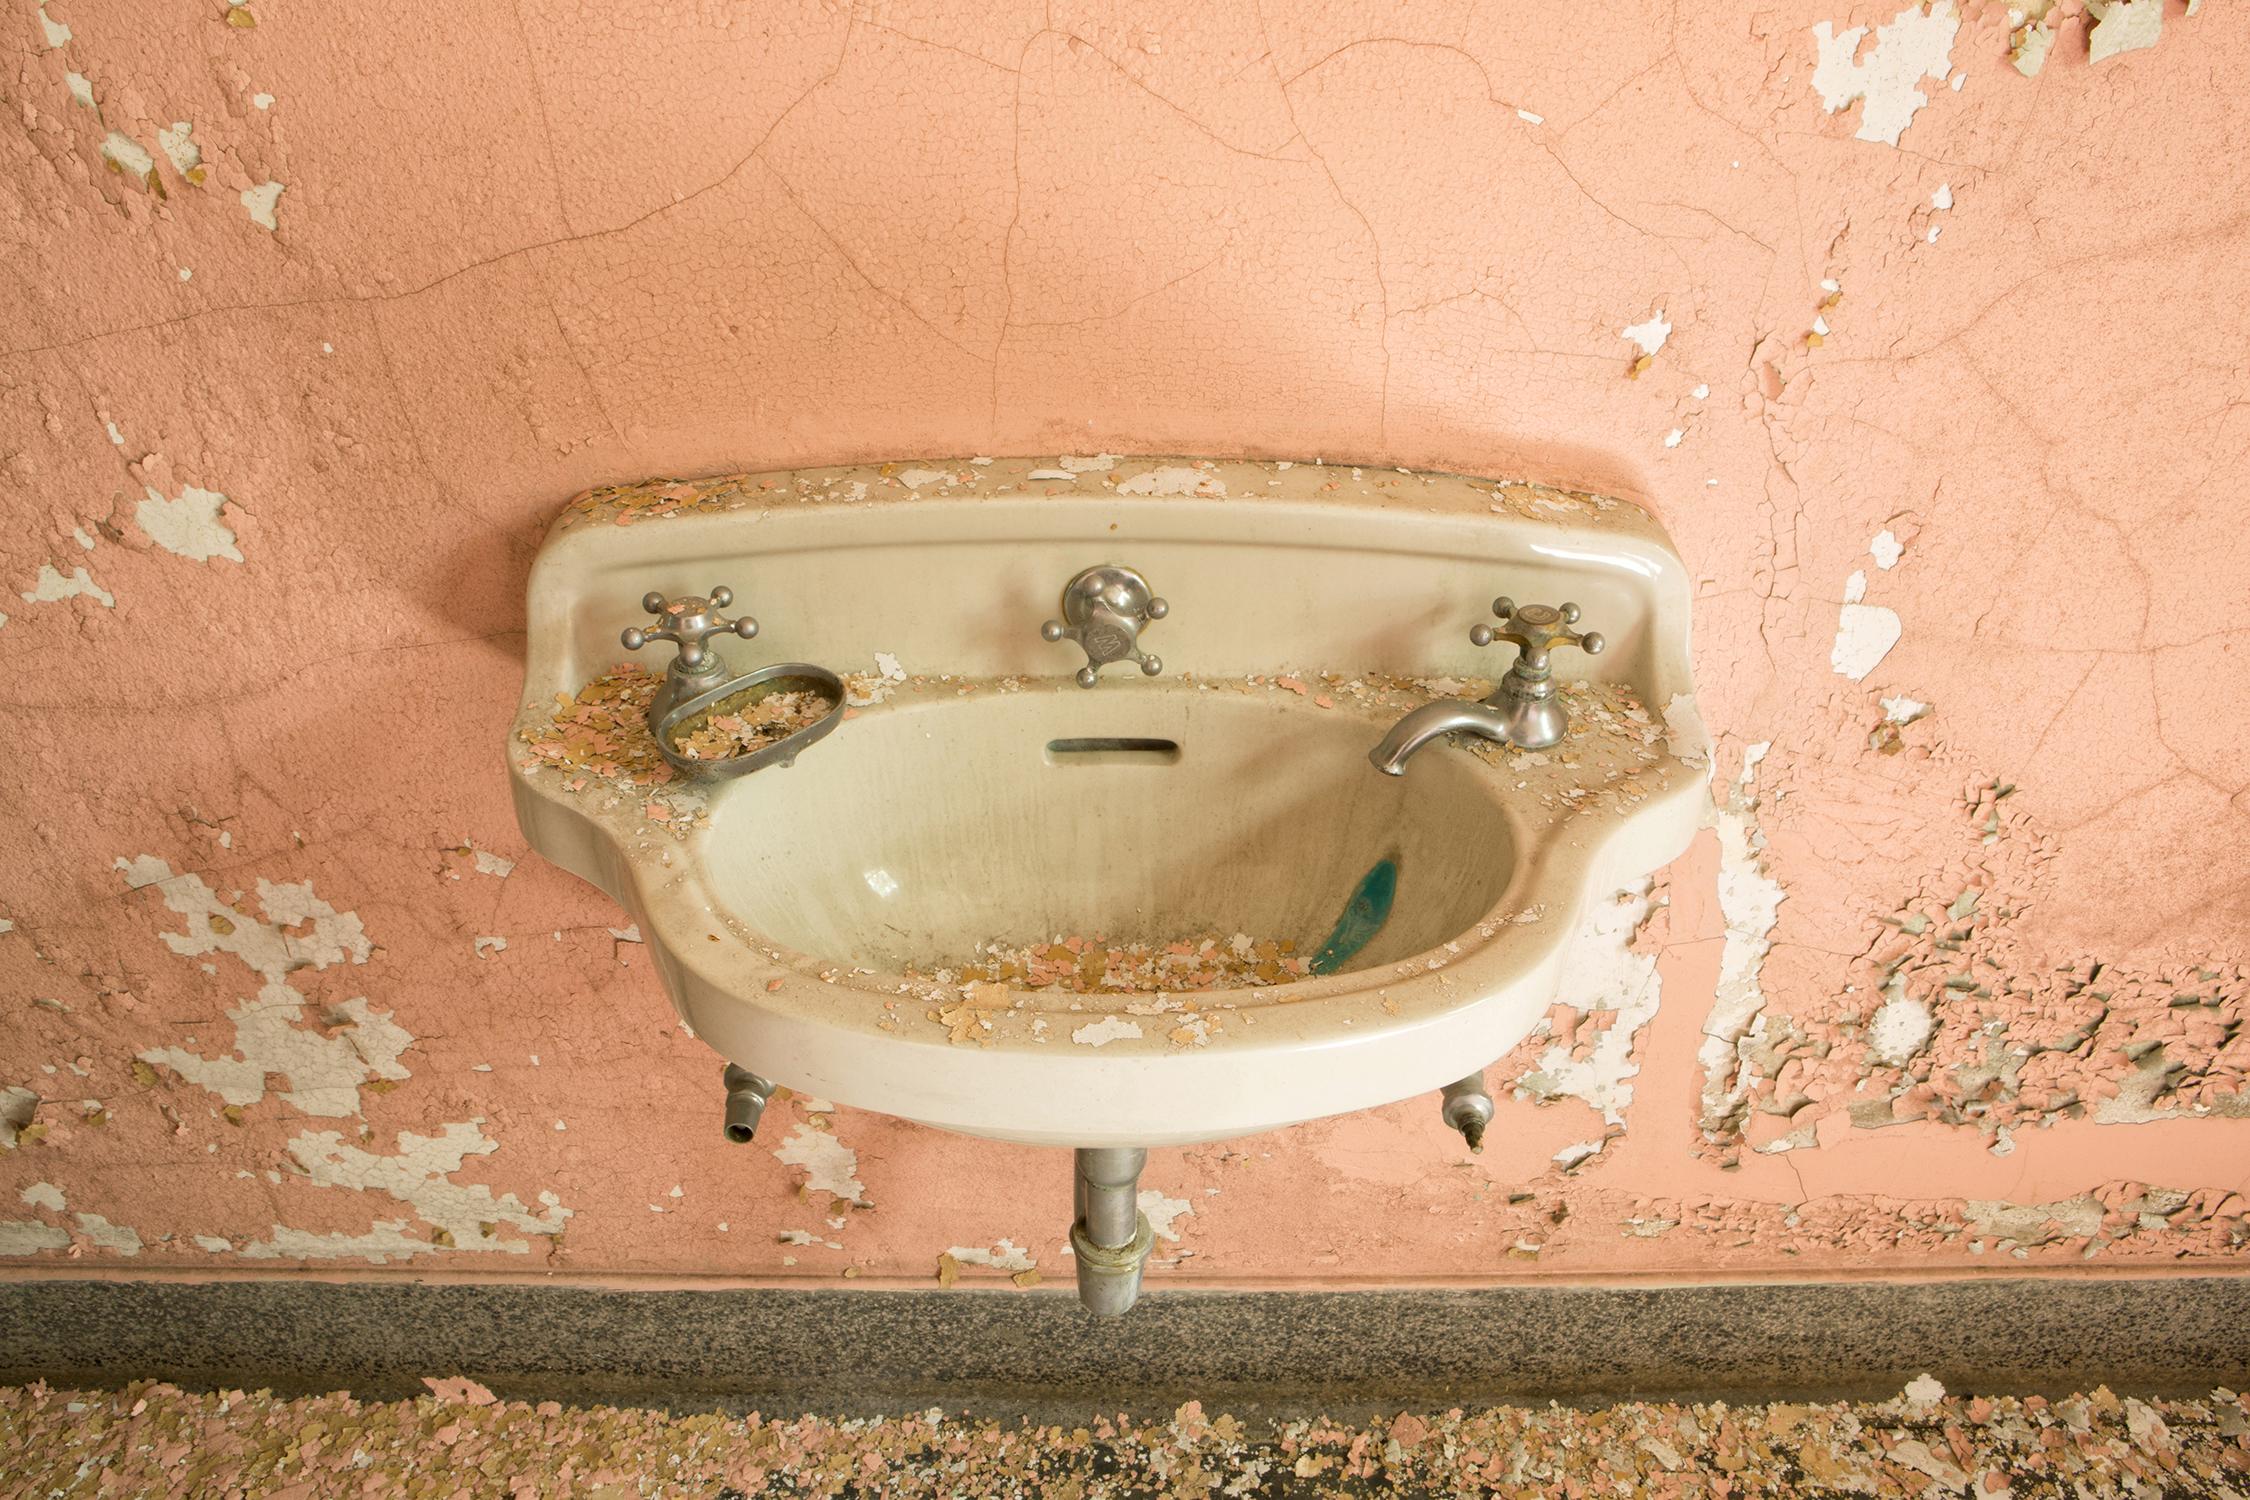 Rebecca Skinner’s “Sink I - VI” is a hexaptych made up of six 8 x 12 inch metal prints photographed at an abandoned hospital. The color photographs are of similar sinks against different colored walls of pink, beige, yellow, green and blue with